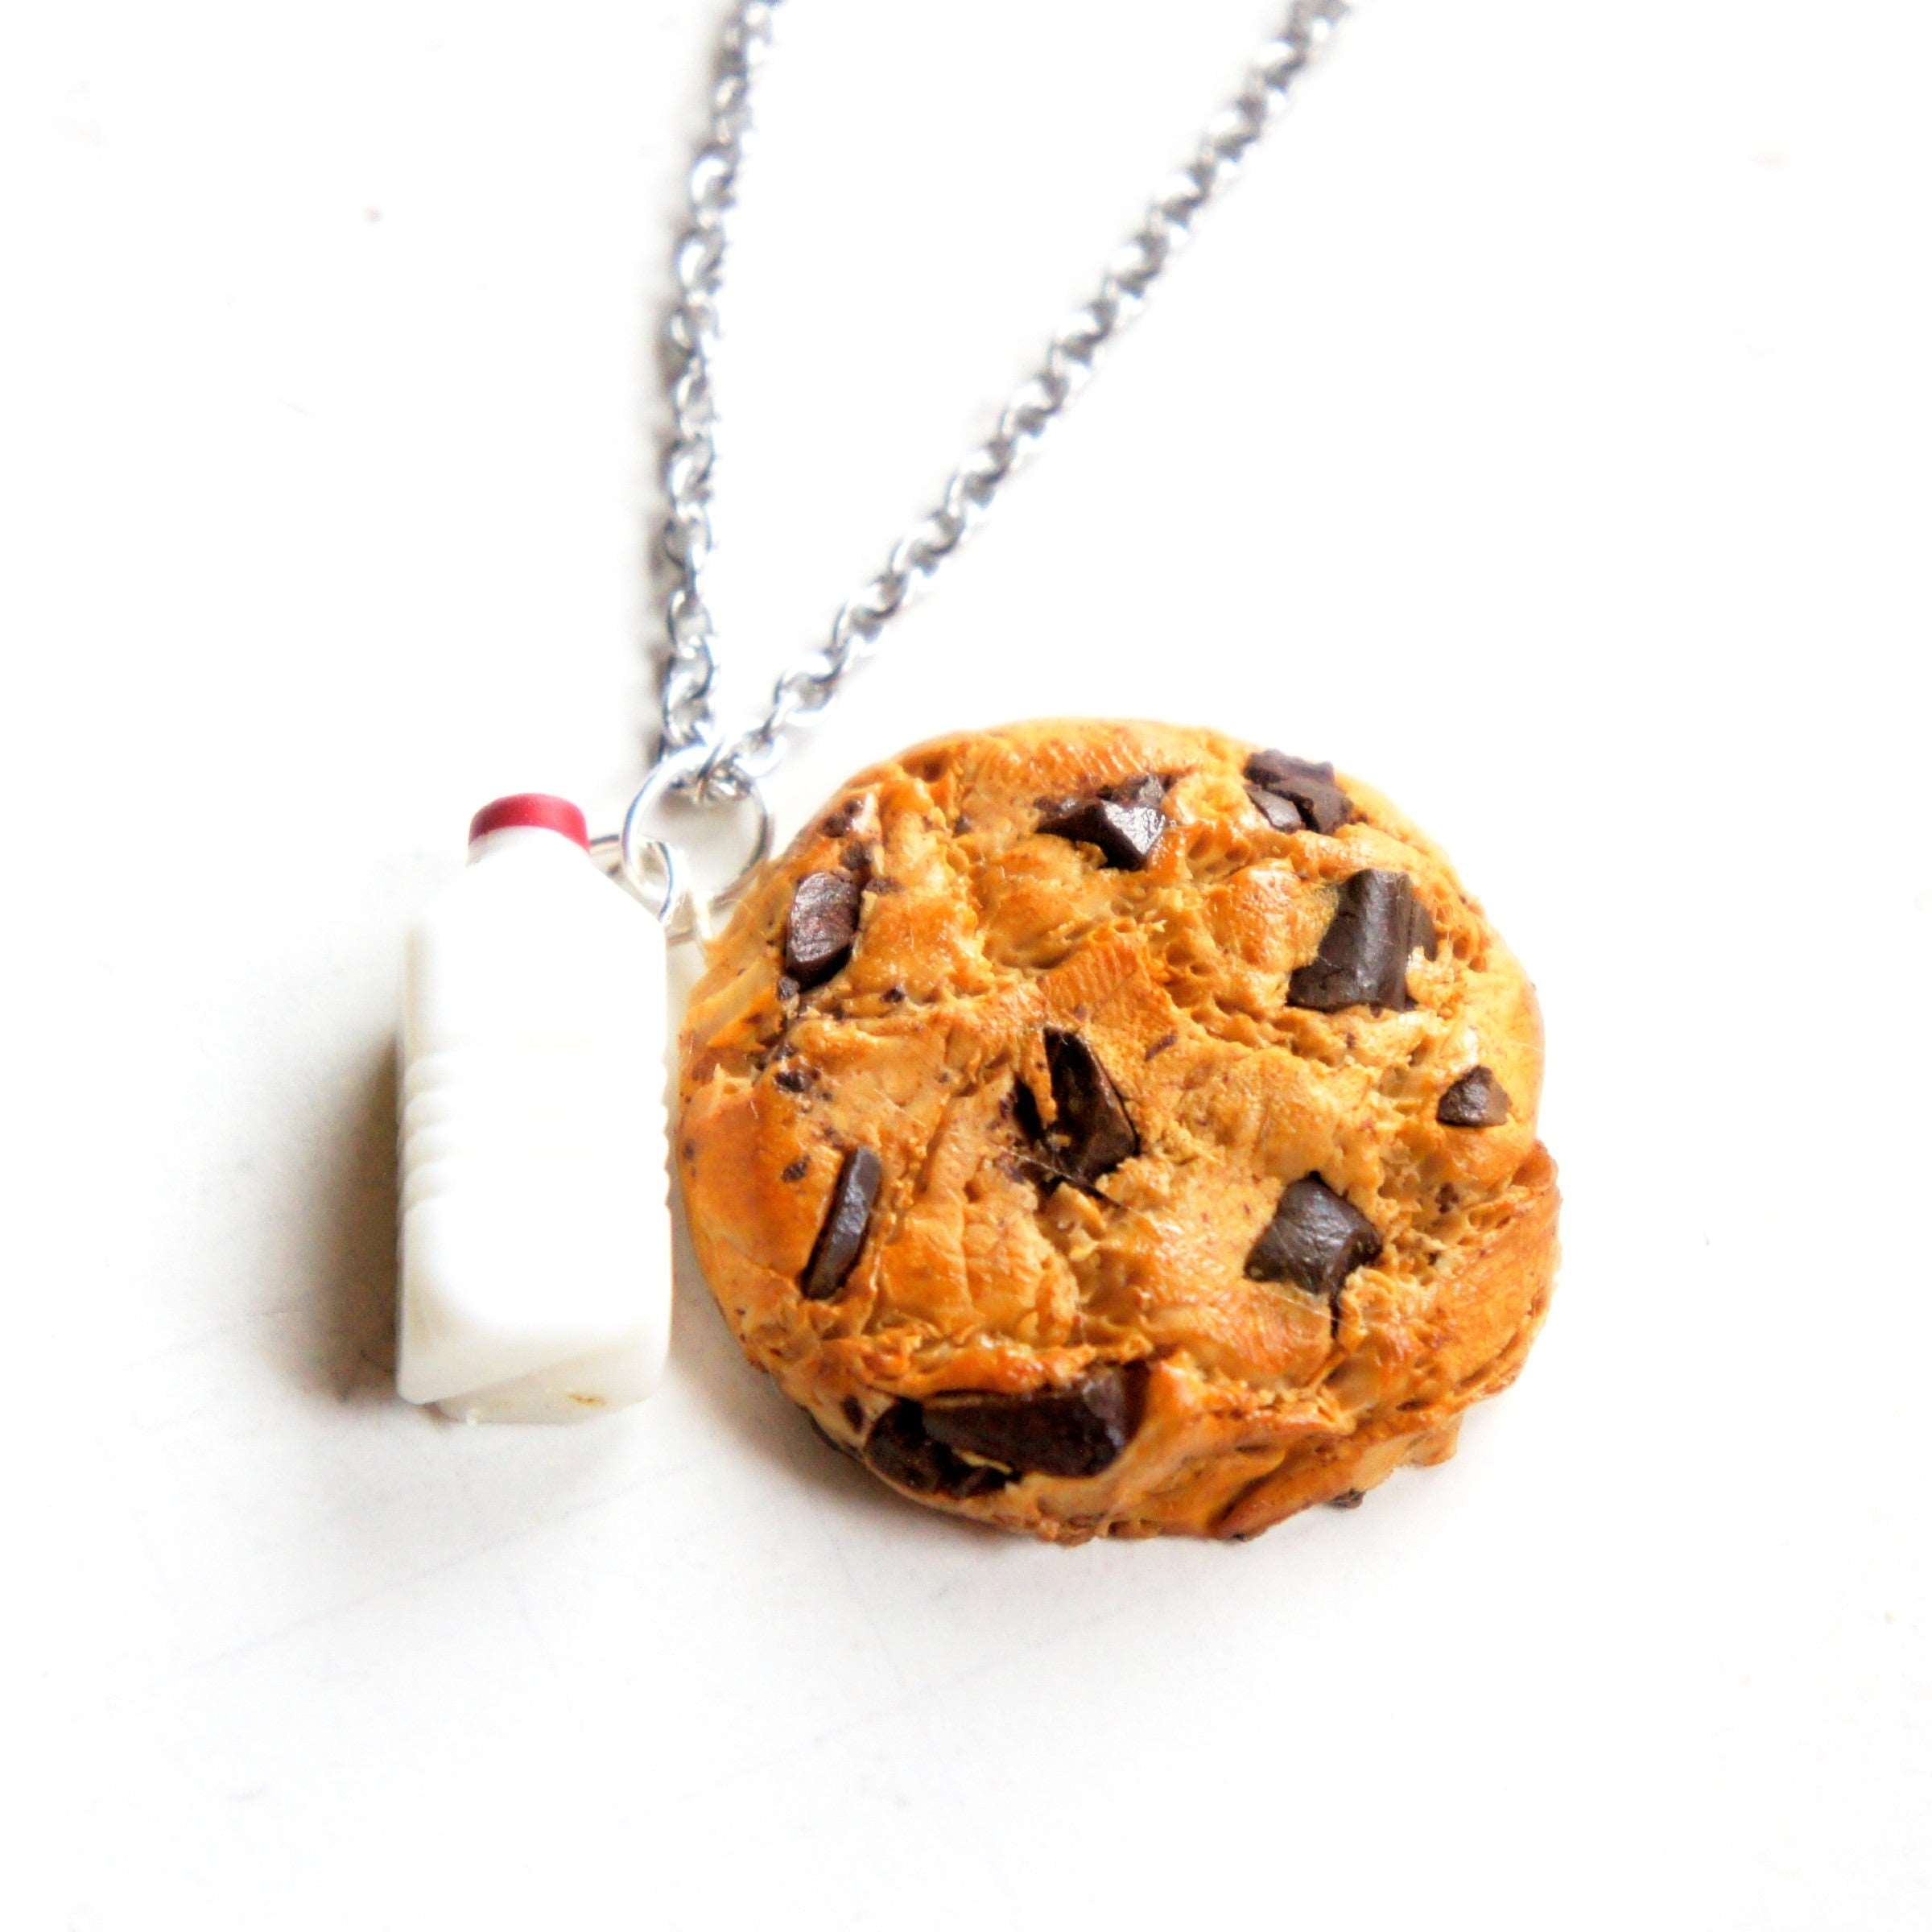 Cookie and Milk Necklace - Jillicious charms and accessories